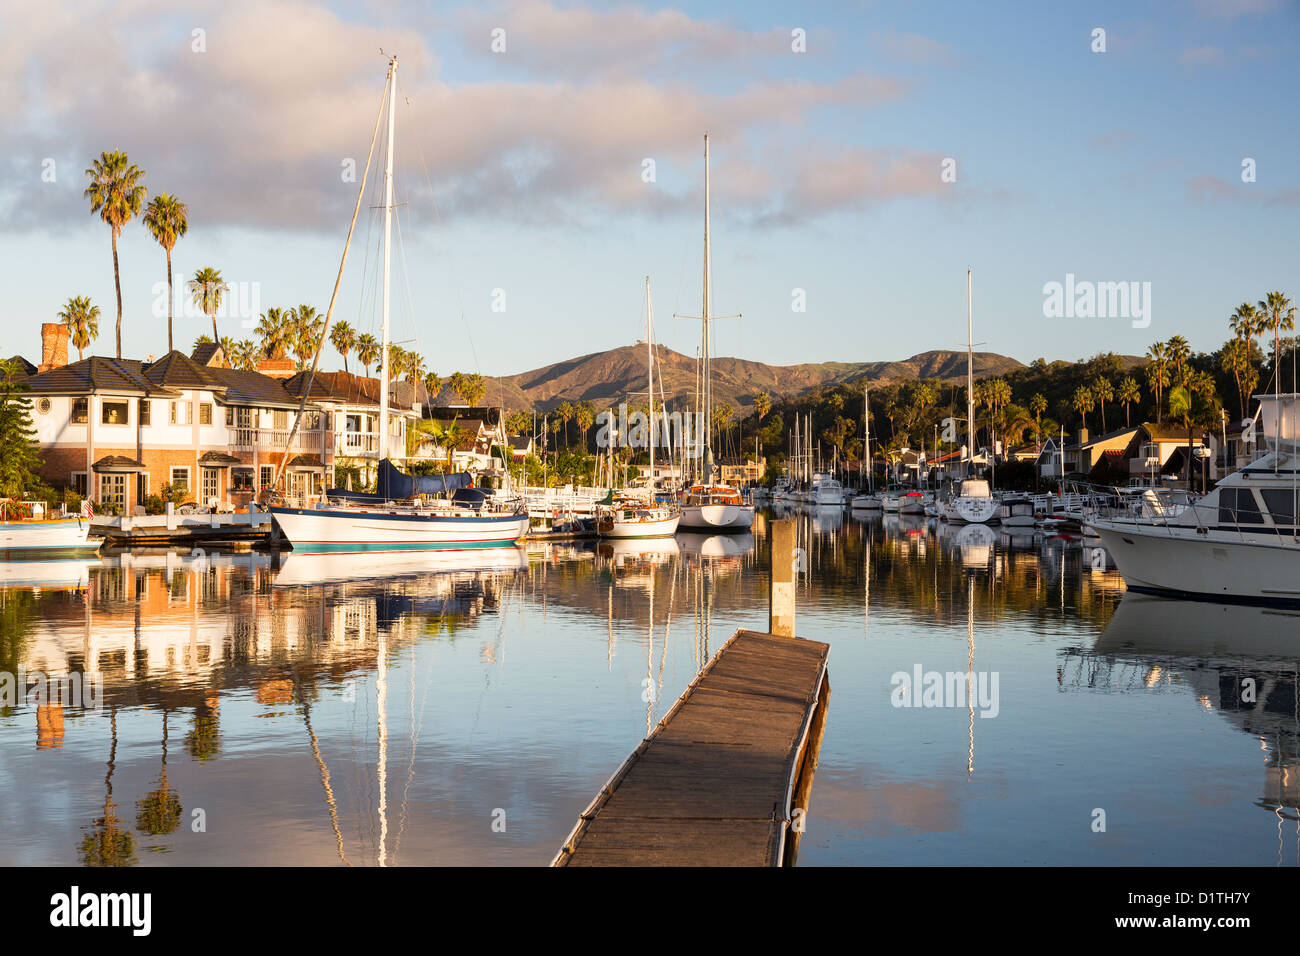 Residential development by water in Ventura, California with modern homes and yachts boats Stock Photo